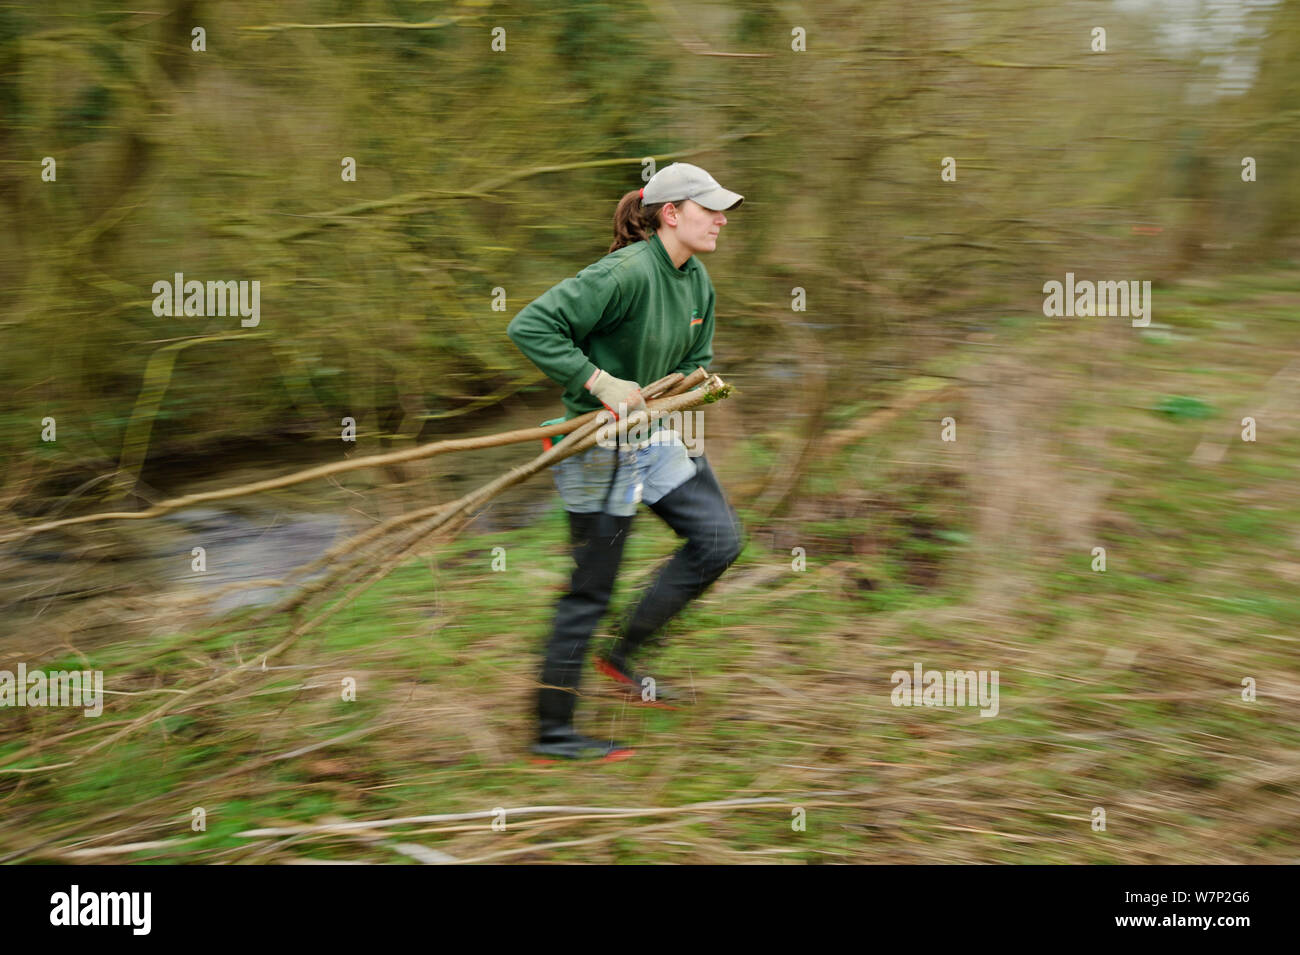 A member of staff from the Wildwoood Trust carries branches of trees cut down improve water vole habitat on a stream and to allow growth of bankside vegetation, East Malling, Kent England, February 2011 Stock Photo